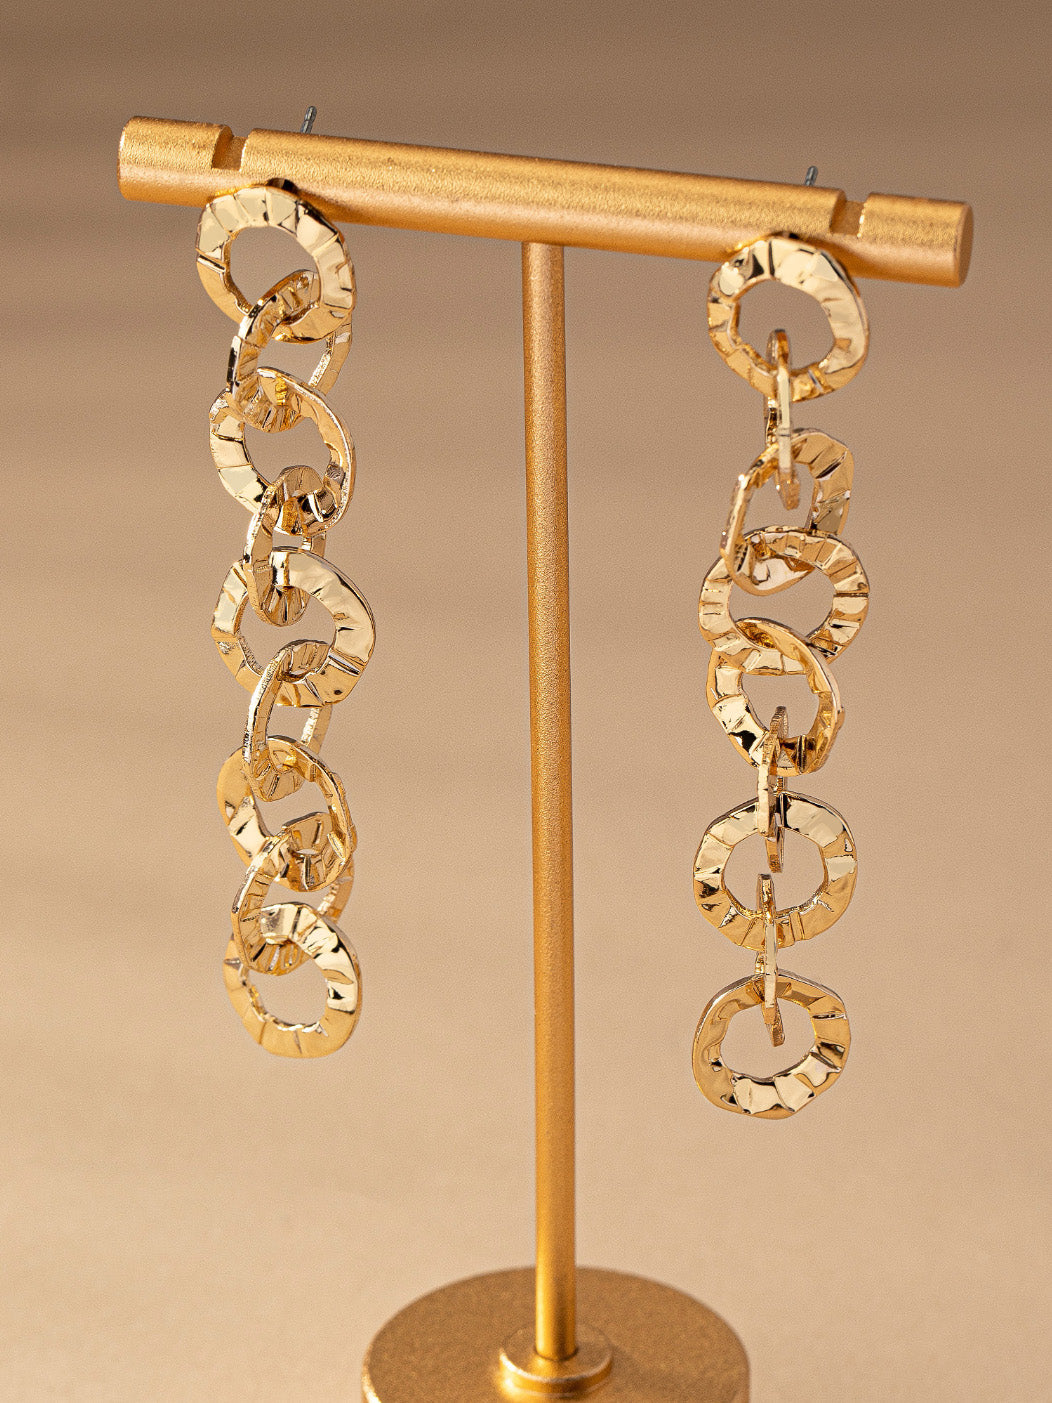 gold hammered link earrings